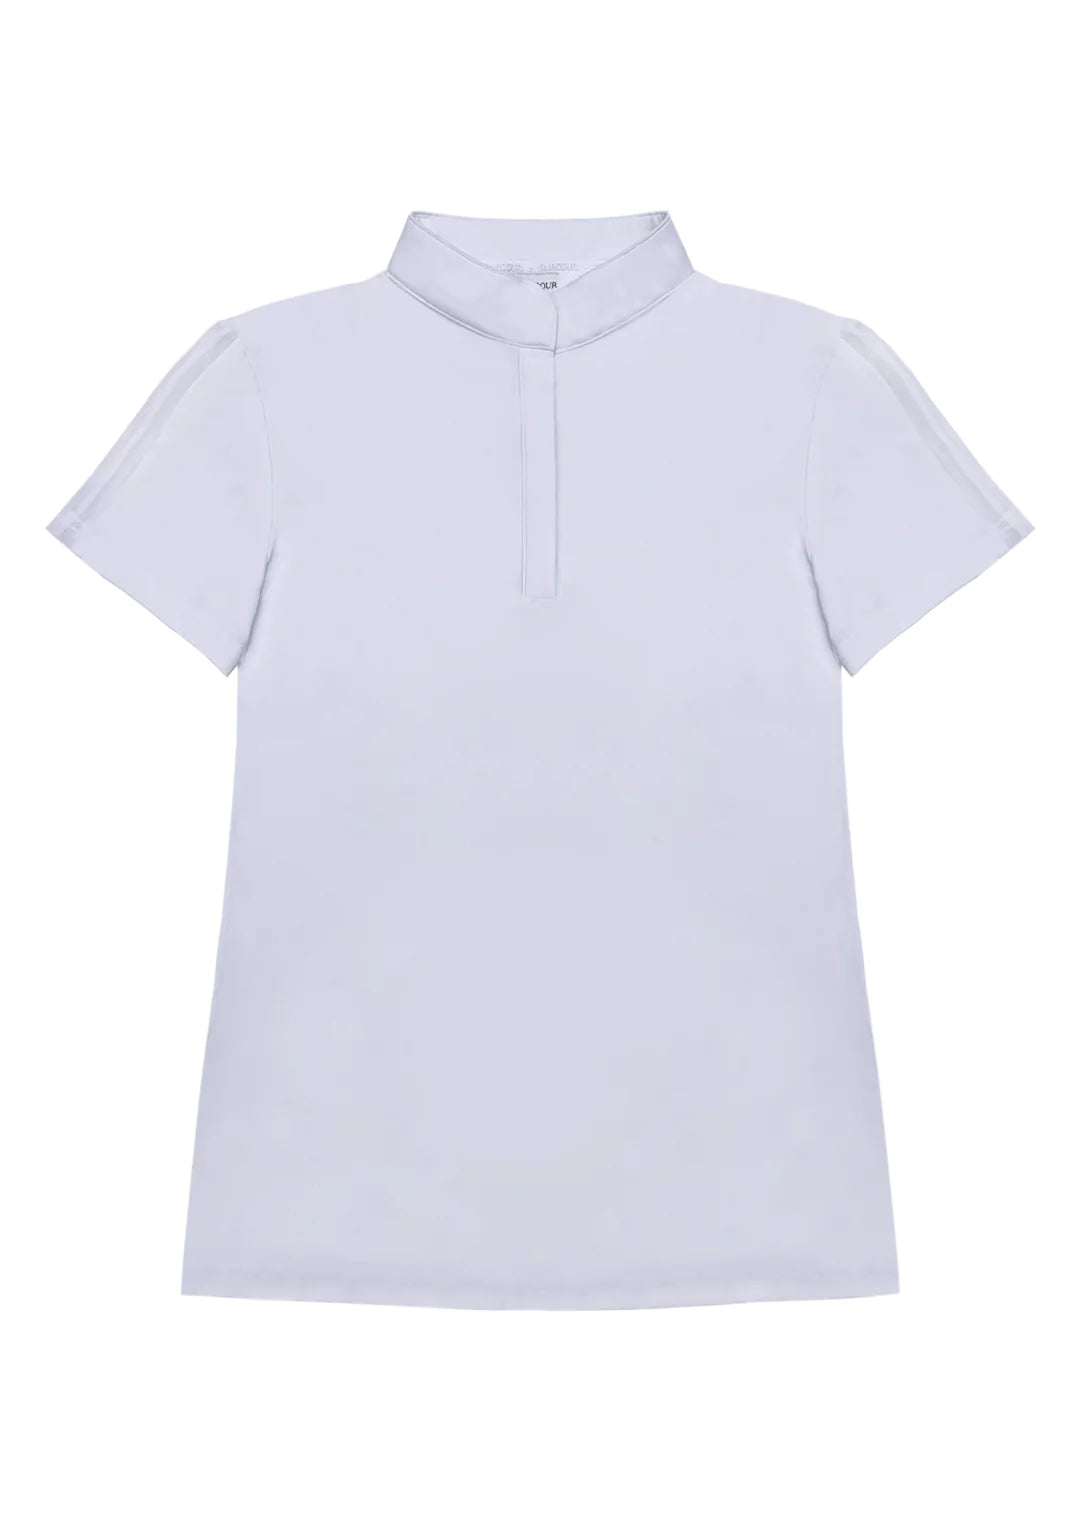 Harcour Prystie Short Sleeve Competition Shirt